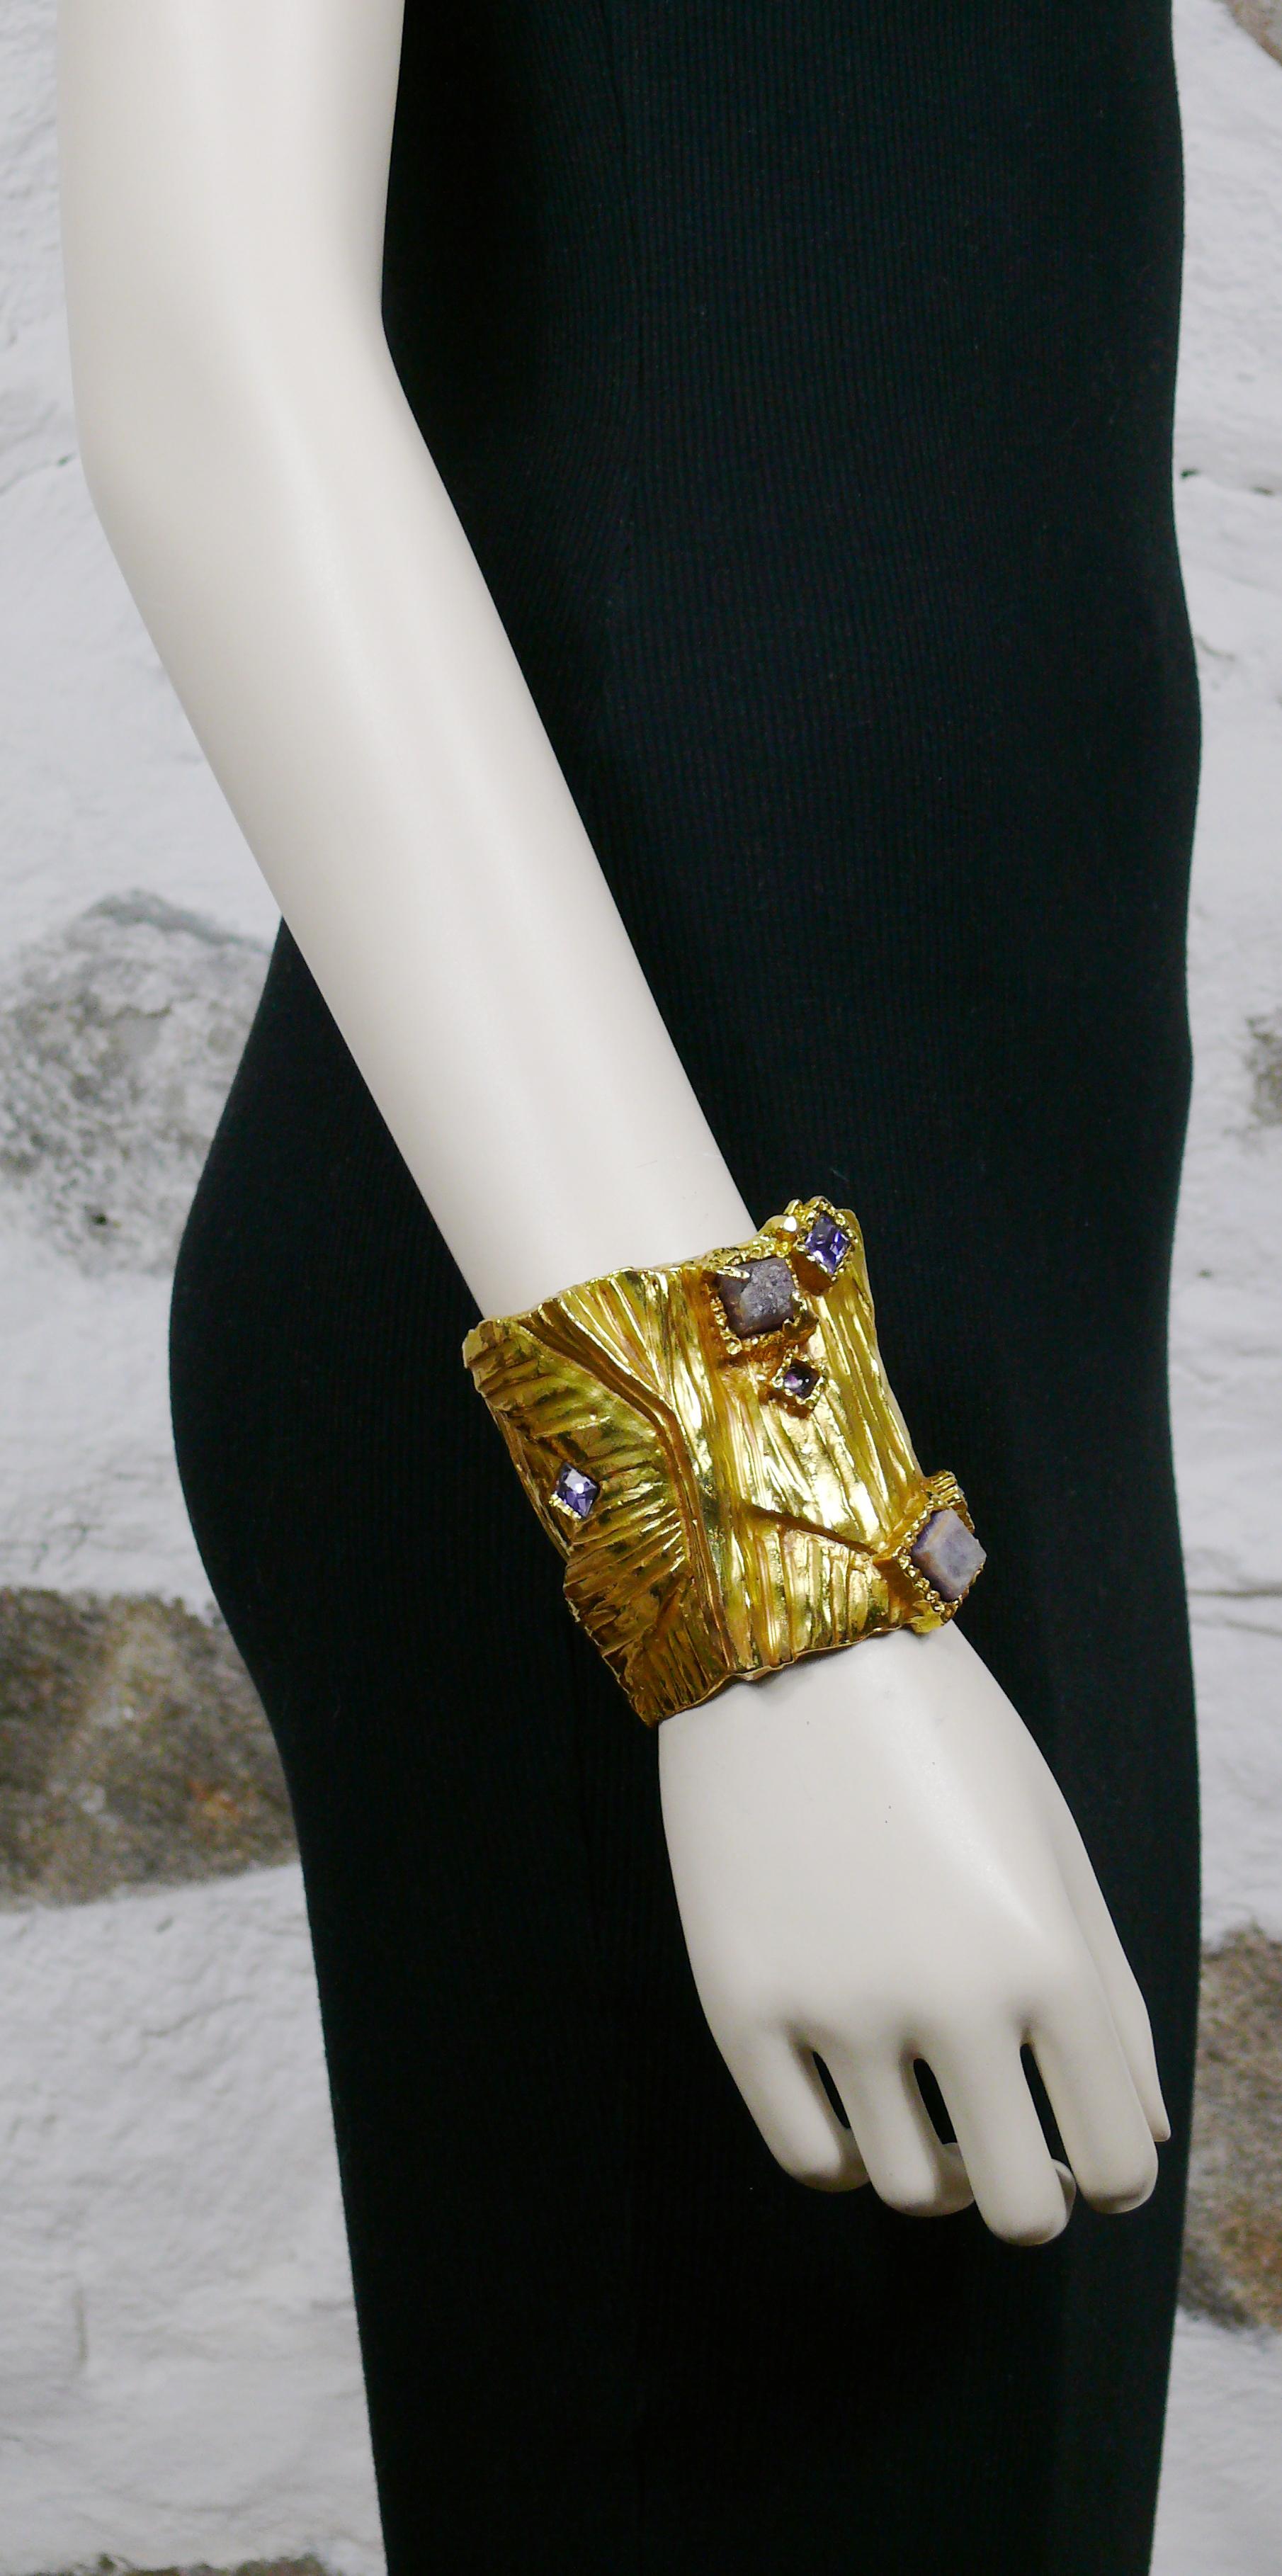 YVES SAINT LAURENT massive ARTY gold toned ribbed texture cuff bracelet embellished with hard stones, crystal and enamel. Stylized Y initial.

Embossed YVES SAINT LAURENT.

Has weight on it (approx. 300 grams).

Indicative measurements : inner max.